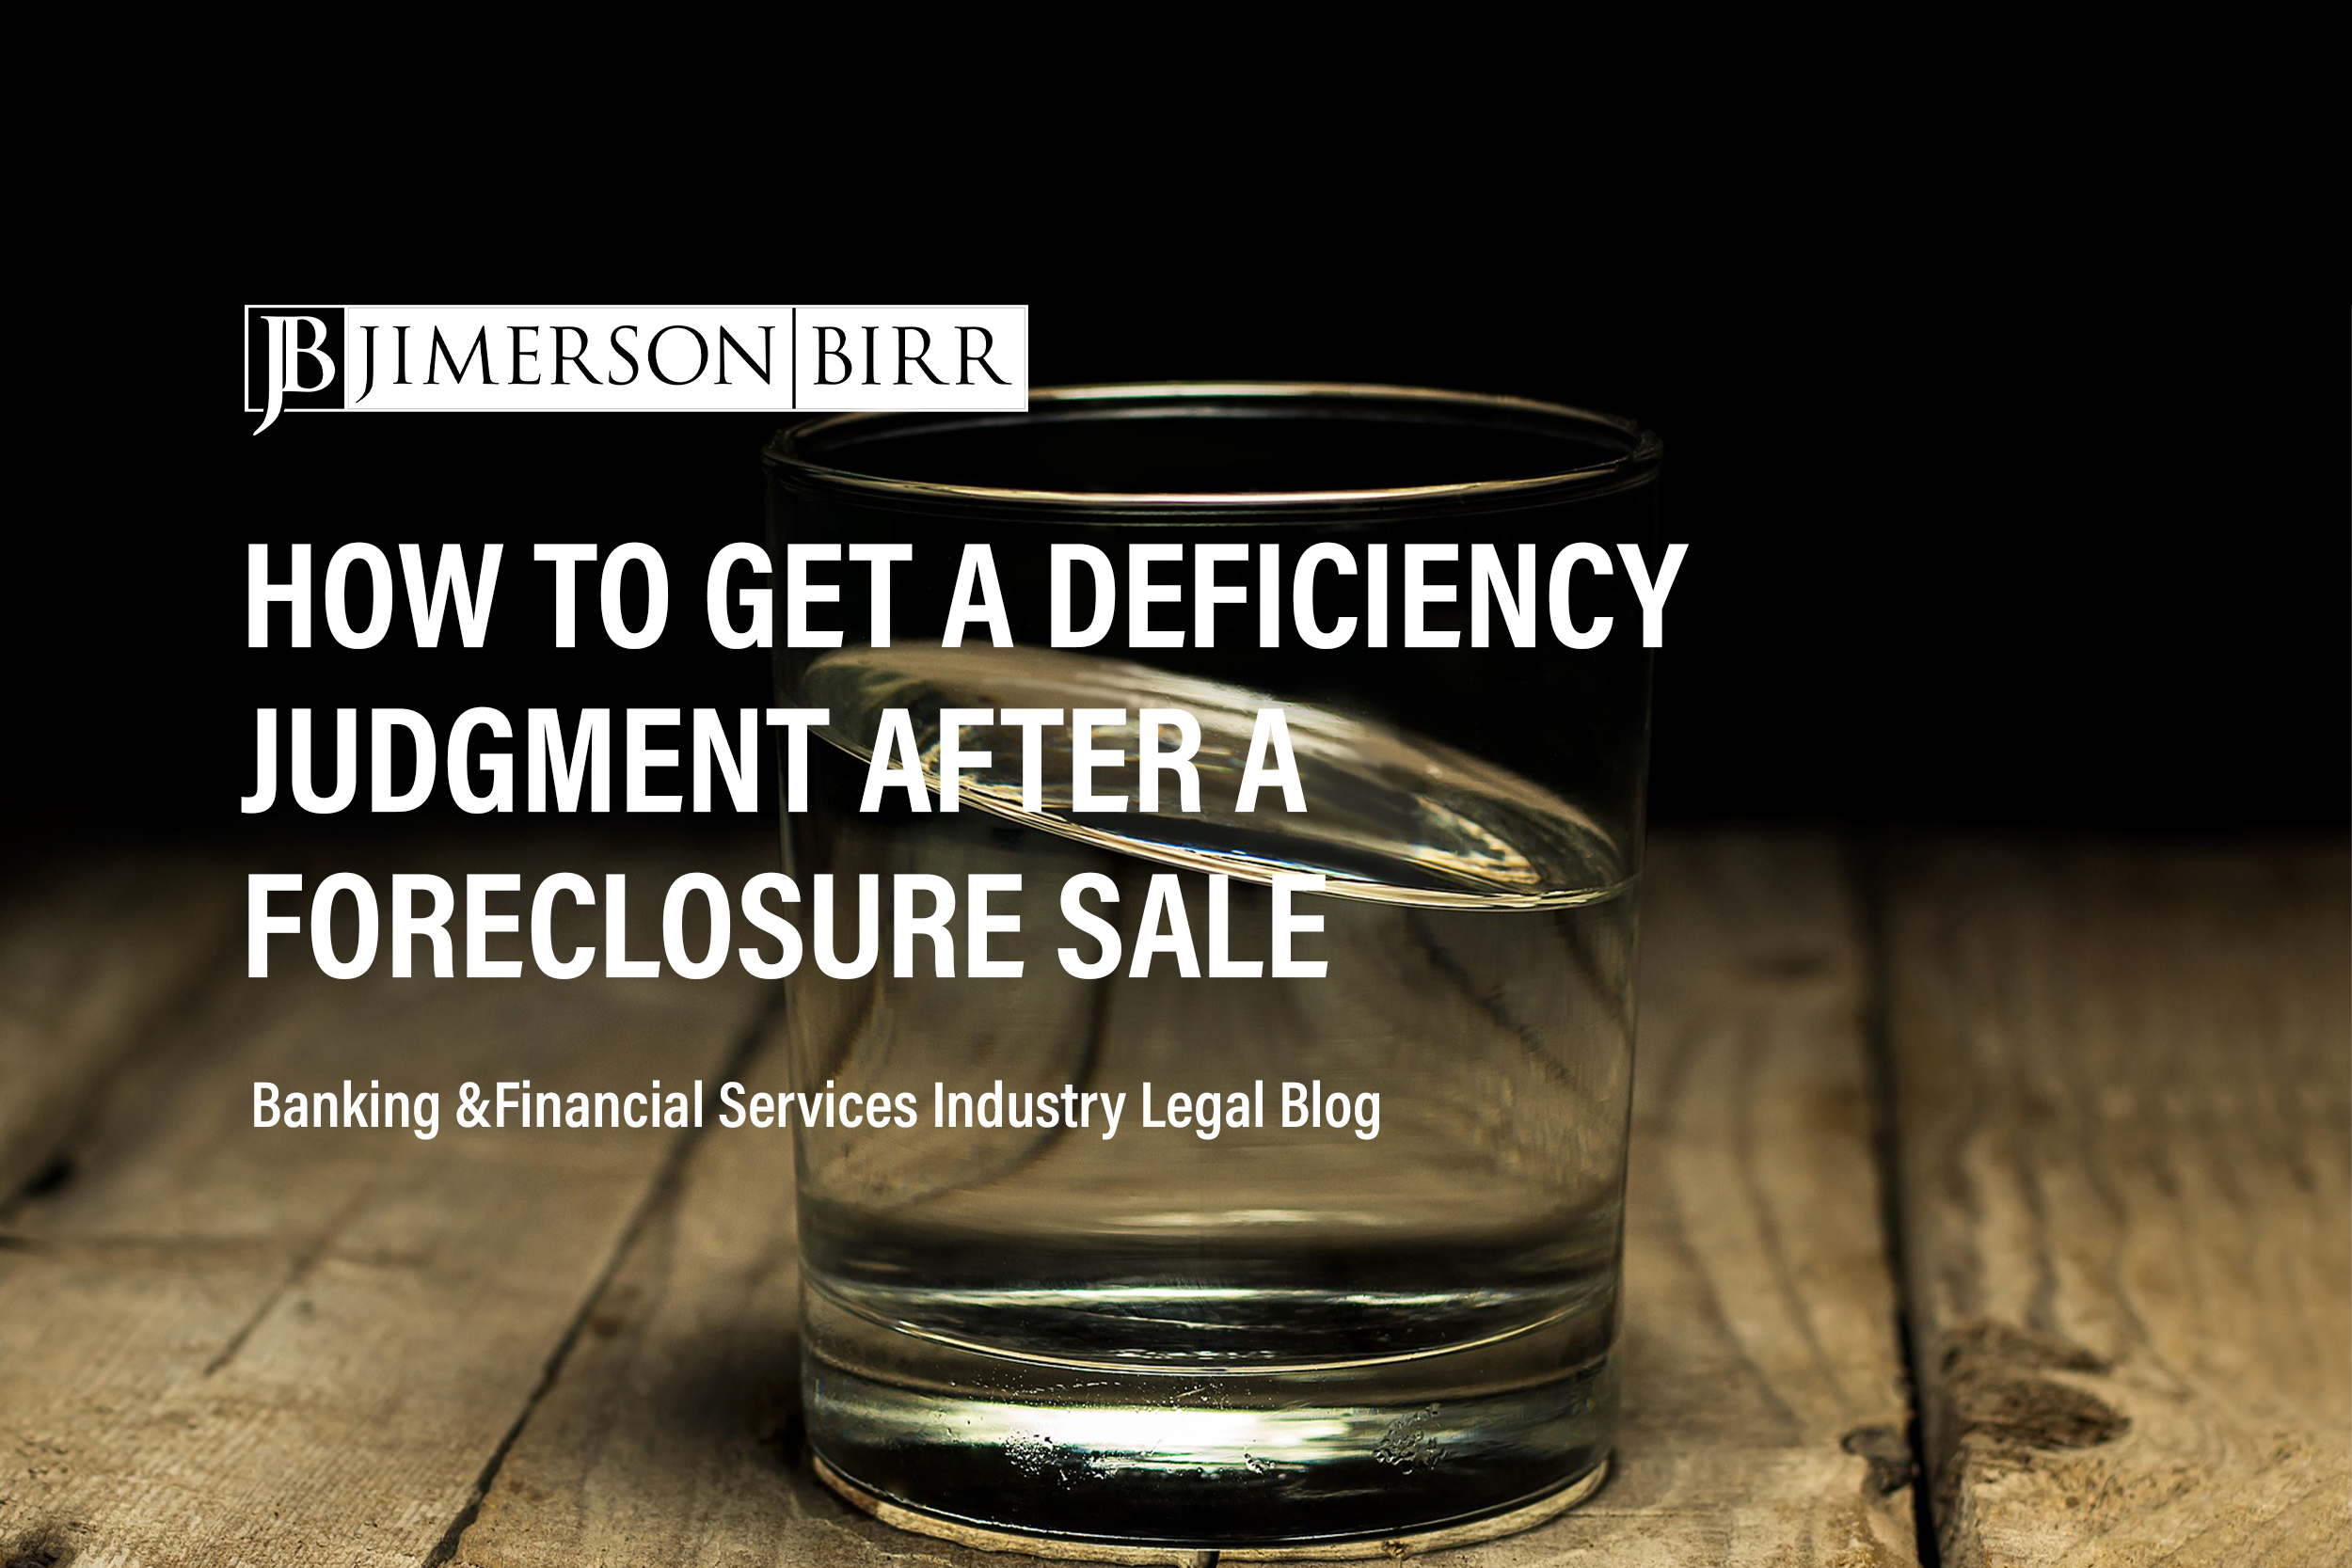 How to Get a Deficiency Judgment After a Foreclosure Sale